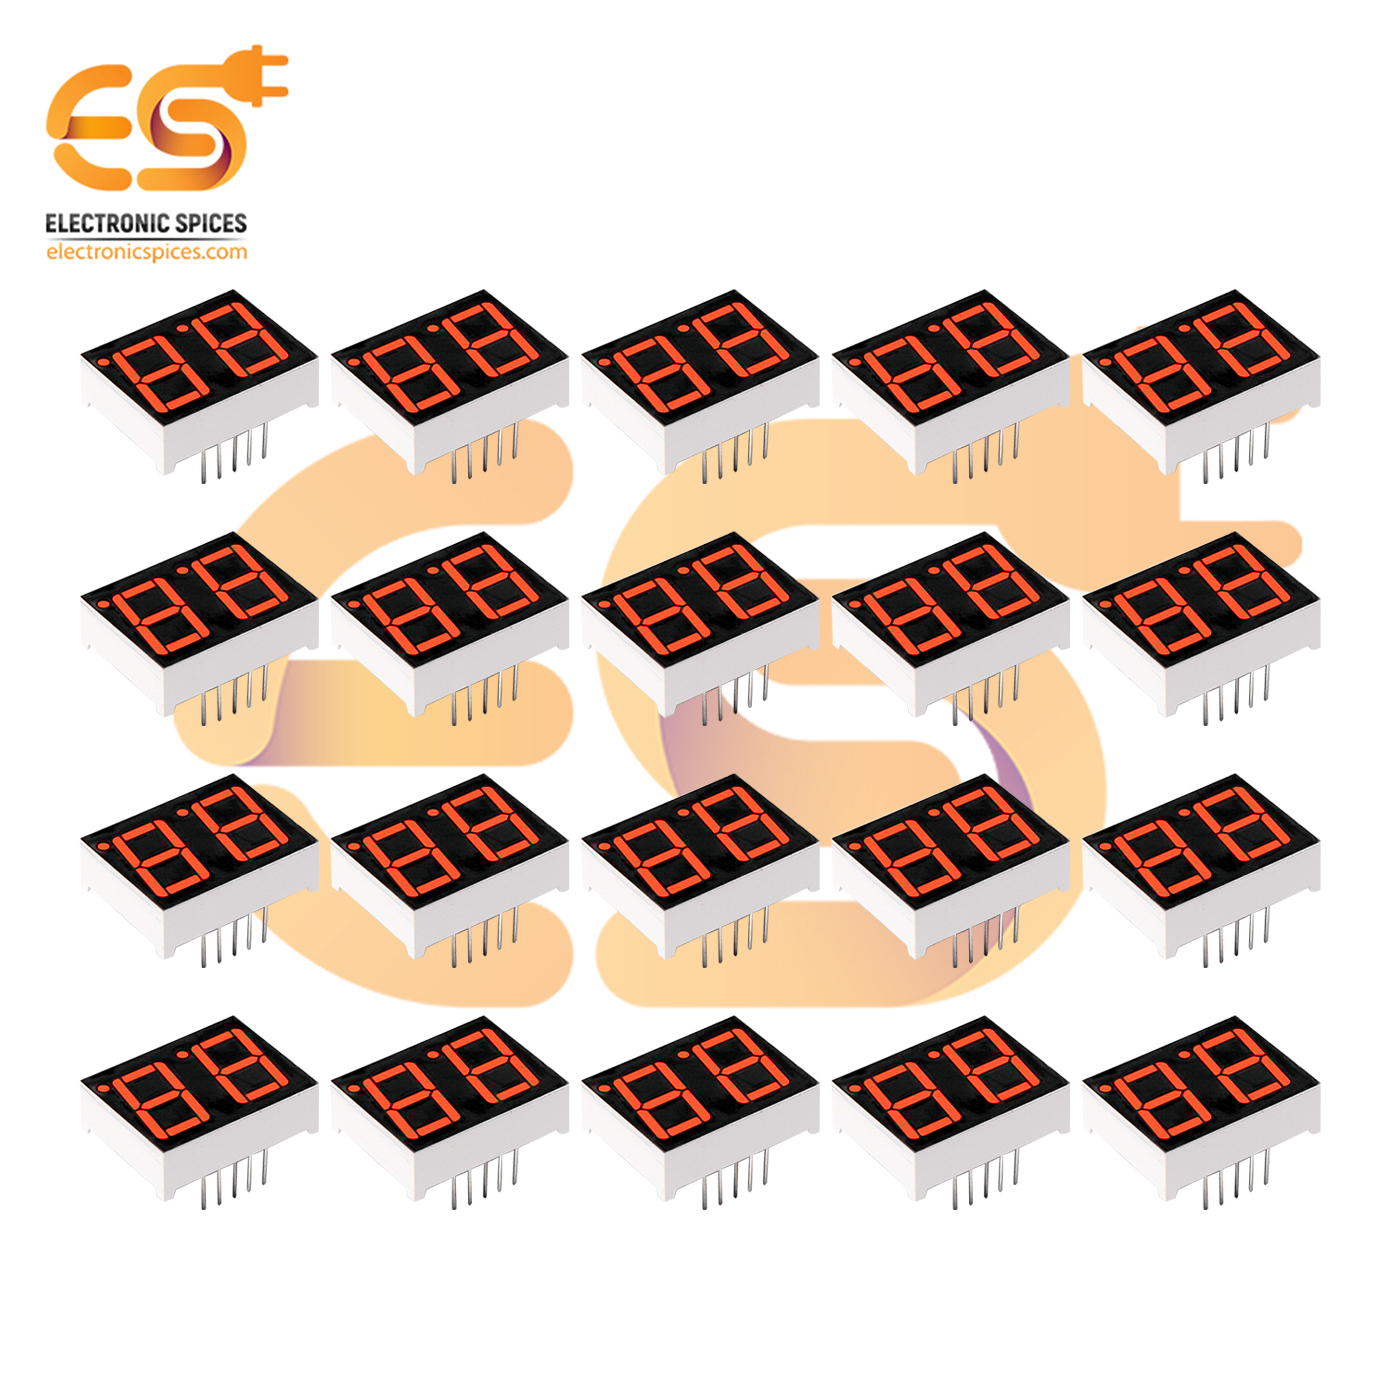 Buy 056 Inch 2 Digit Red Display Color 7 Segment Led Display Common Cathodes Pack Of 50pcs 8577